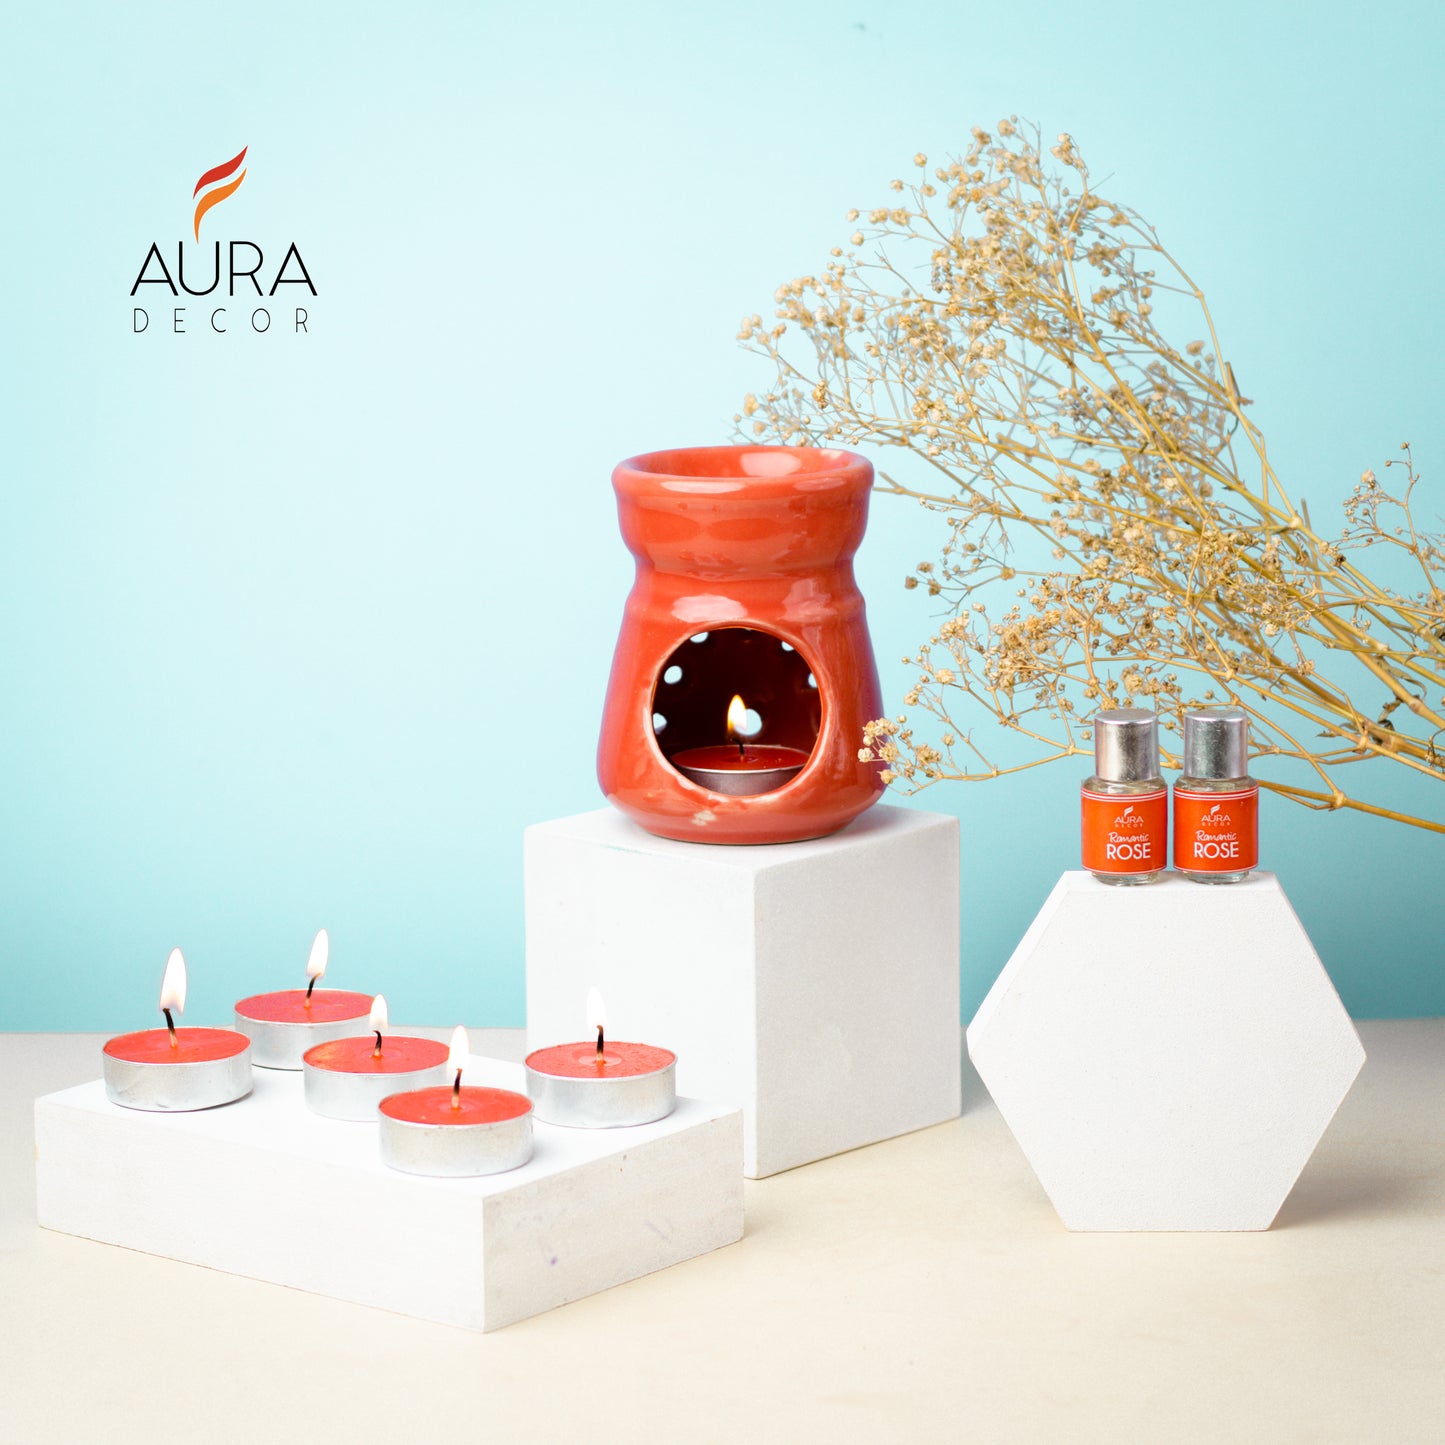 AuraDecor Aromatherapy Diffuser Gift Set with 6 Tealights (GS-09)